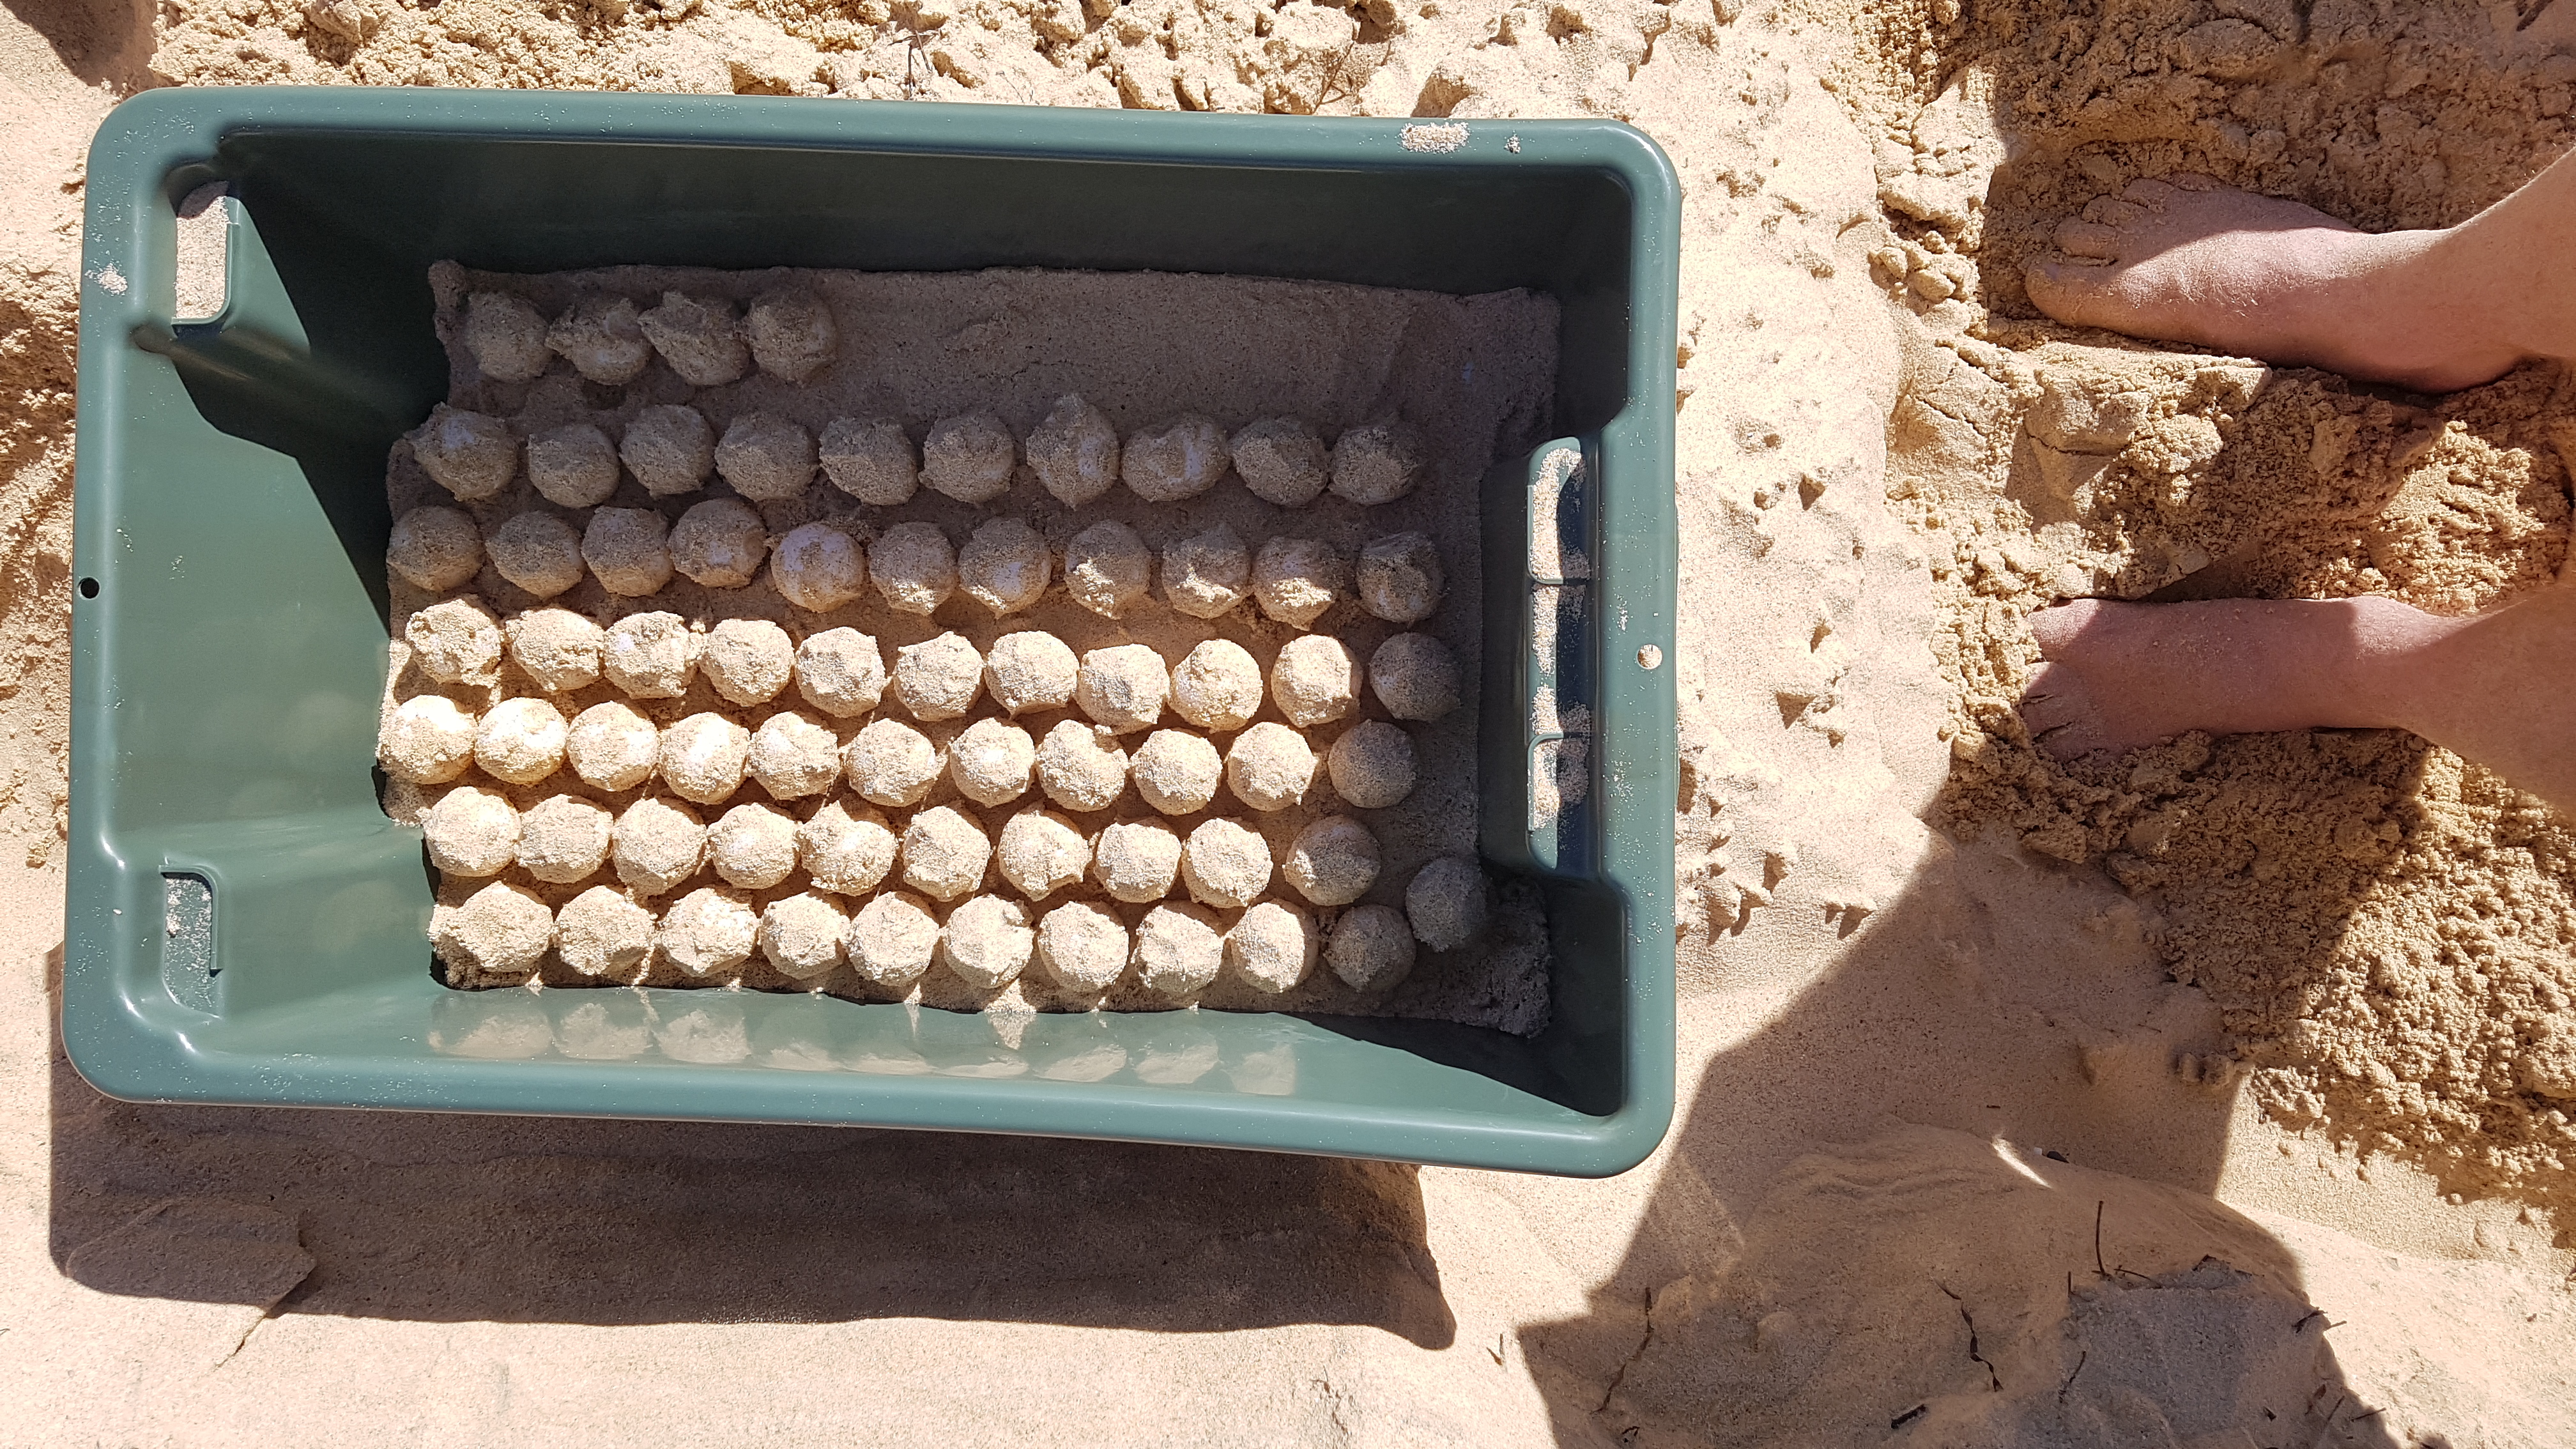 Looking into a plastic rectangular tub of 139 round turtle eggs on a sandy beach. 